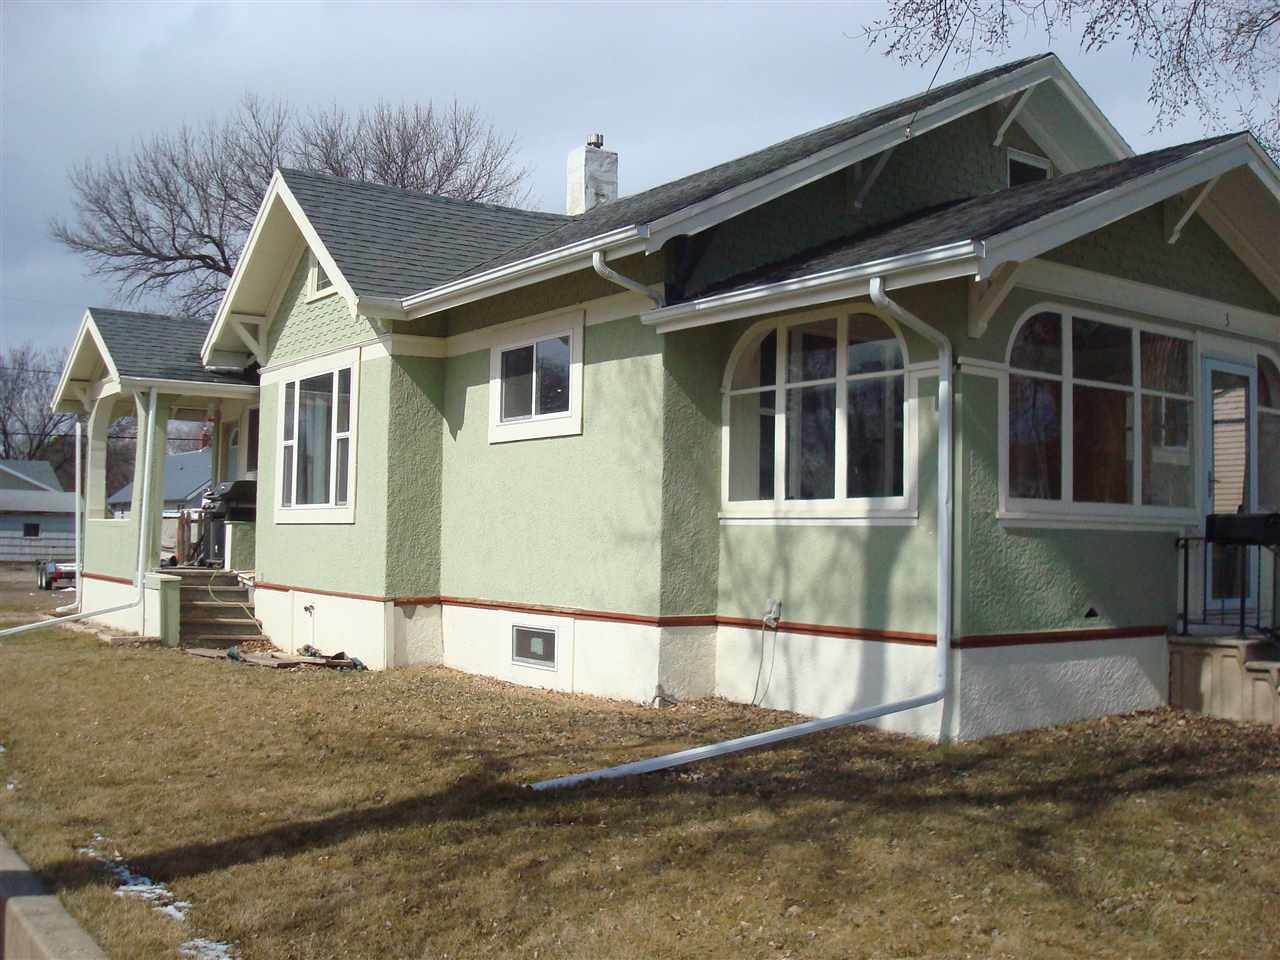 3 NW 7th St, Minot, ND 58703